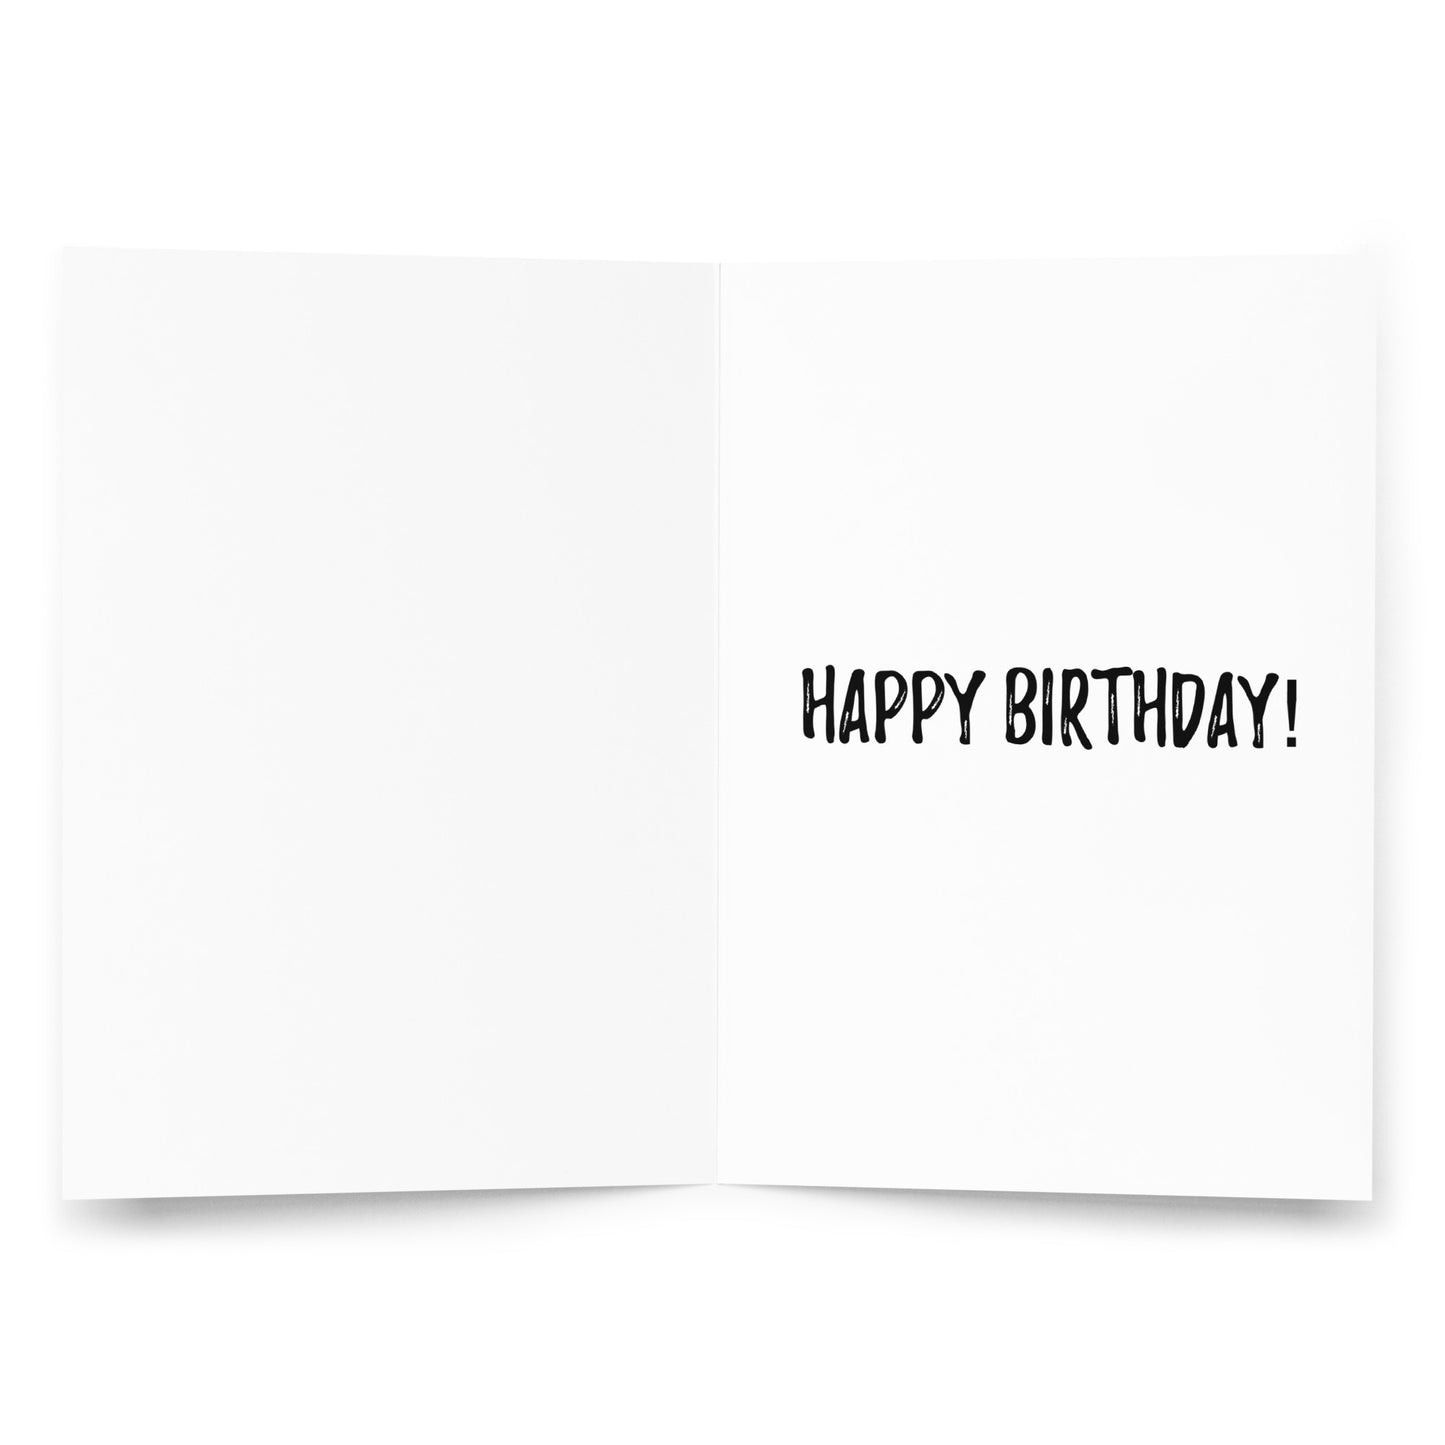 Funny 25th birthday card | now that's what I call old! A5 card | 25 years old